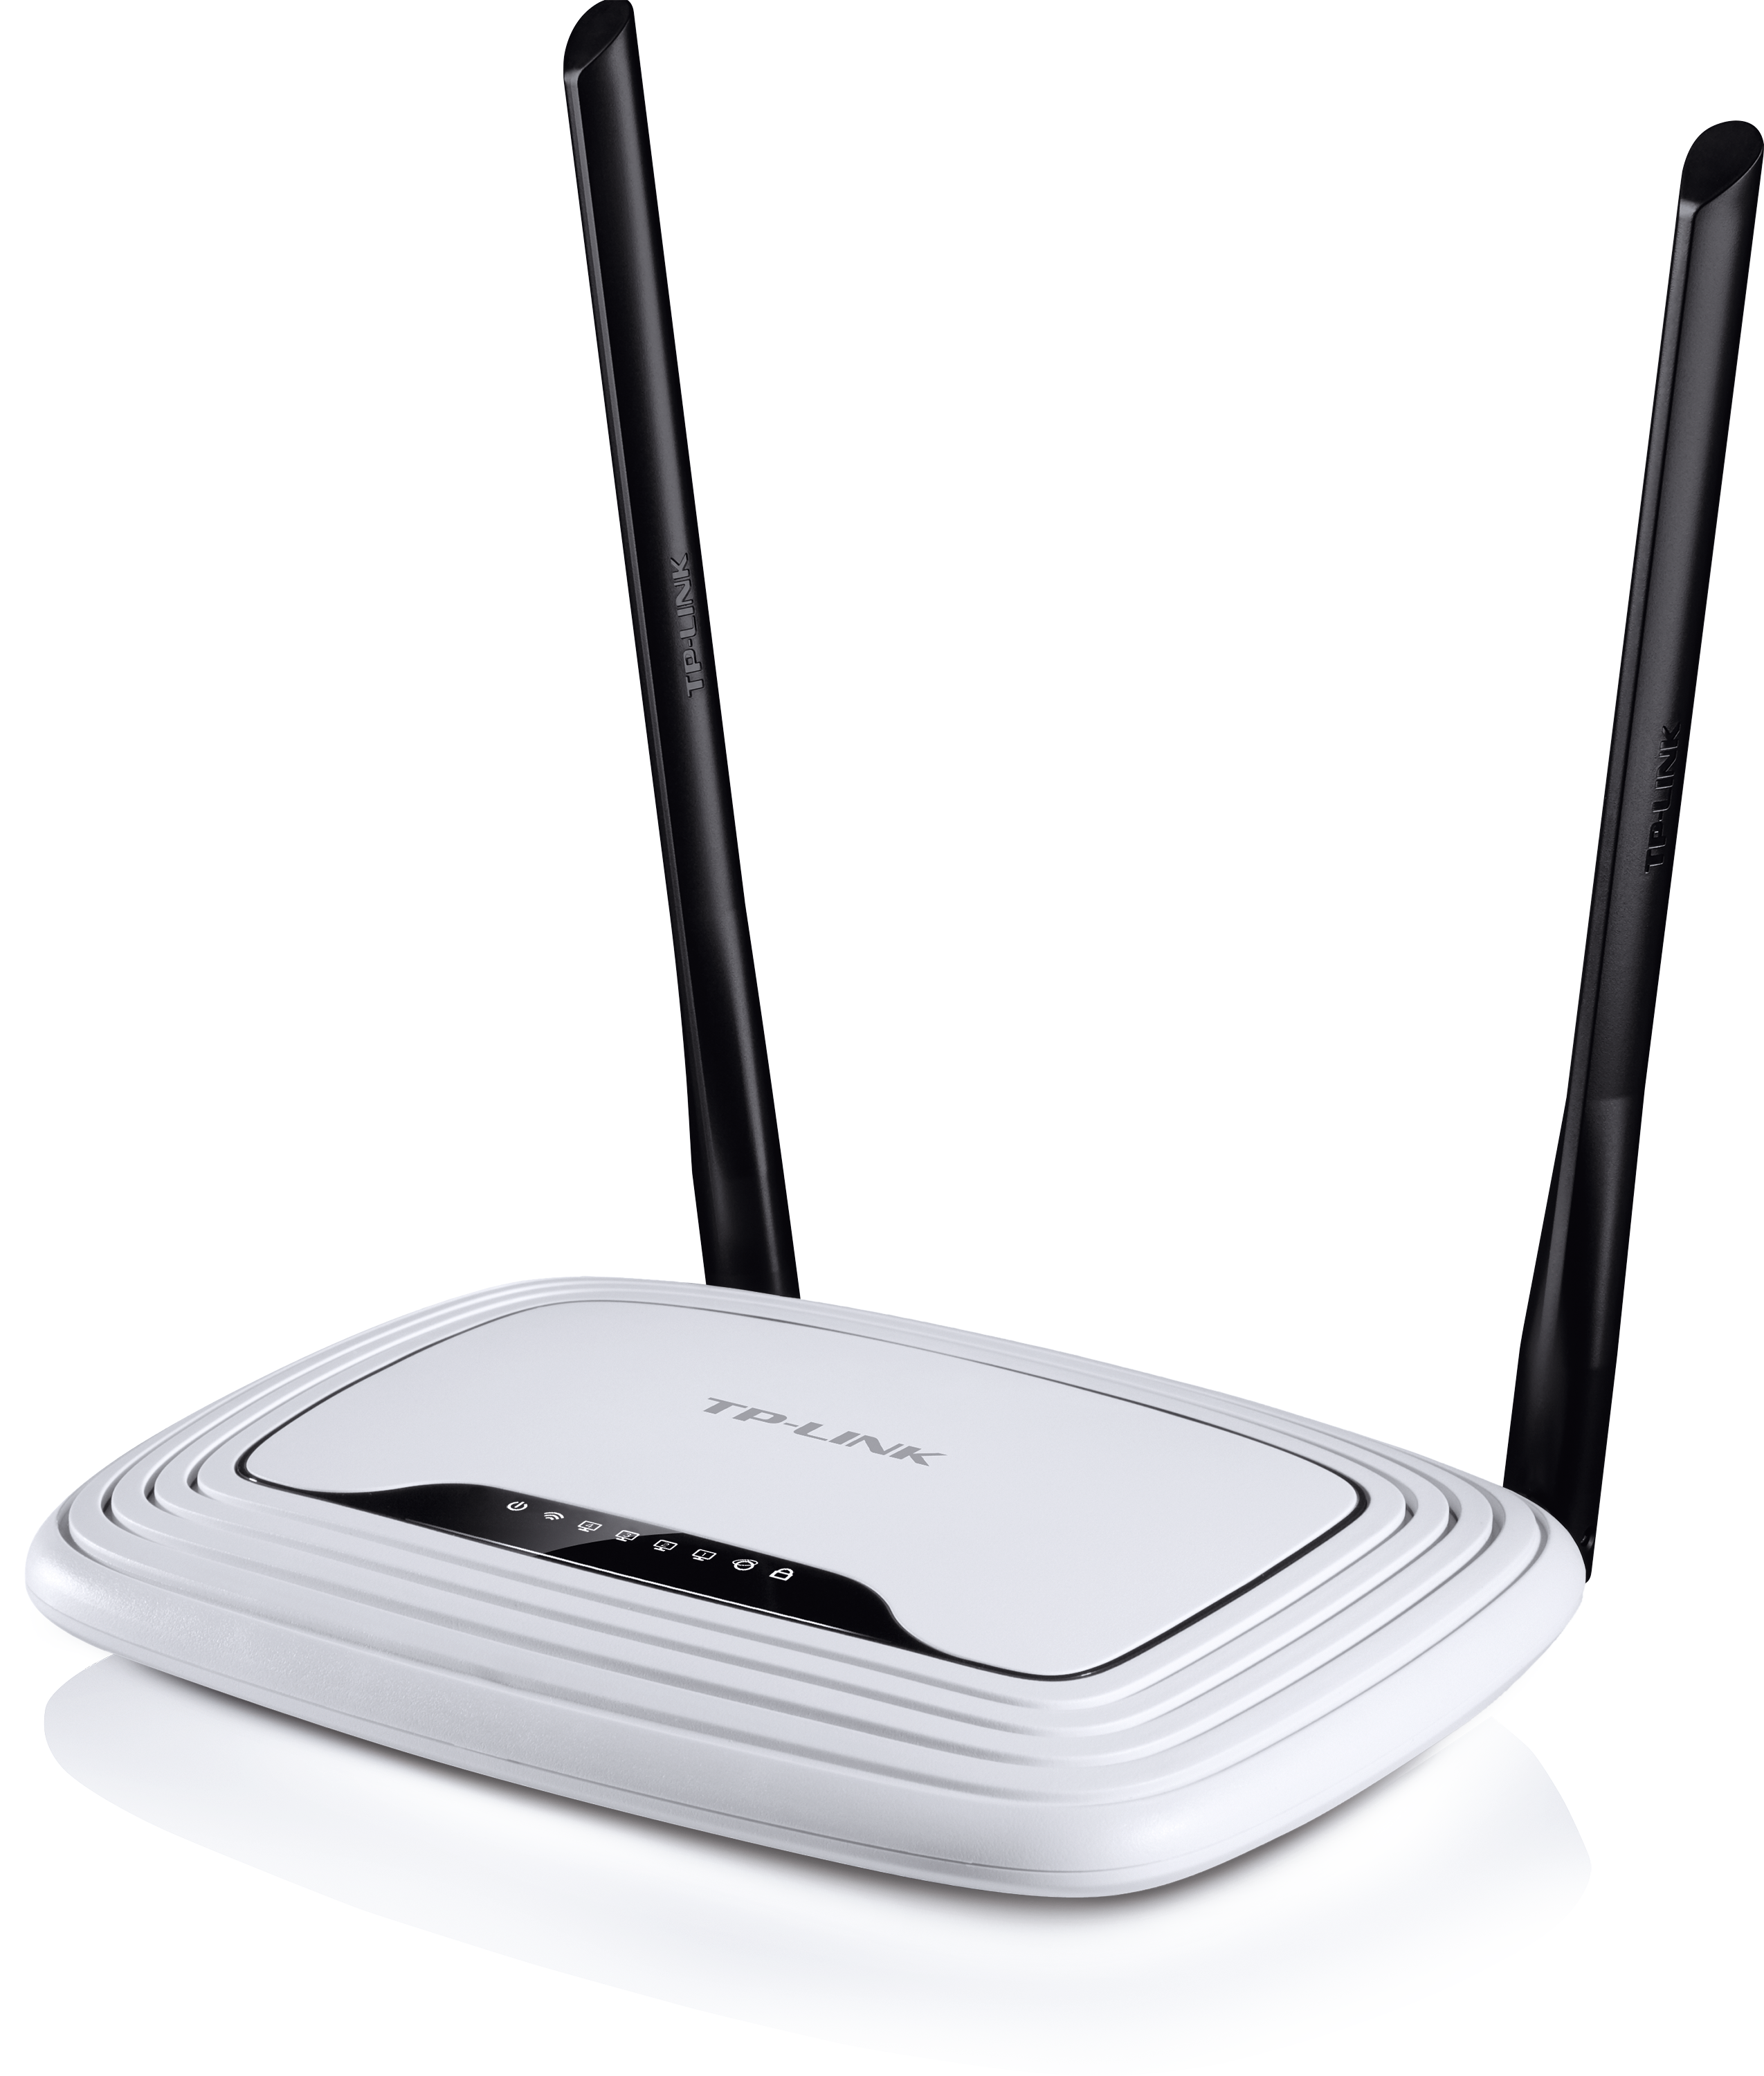 TP-Link TL-WR841N 300mbps Wireless N Router - image 3 of 4